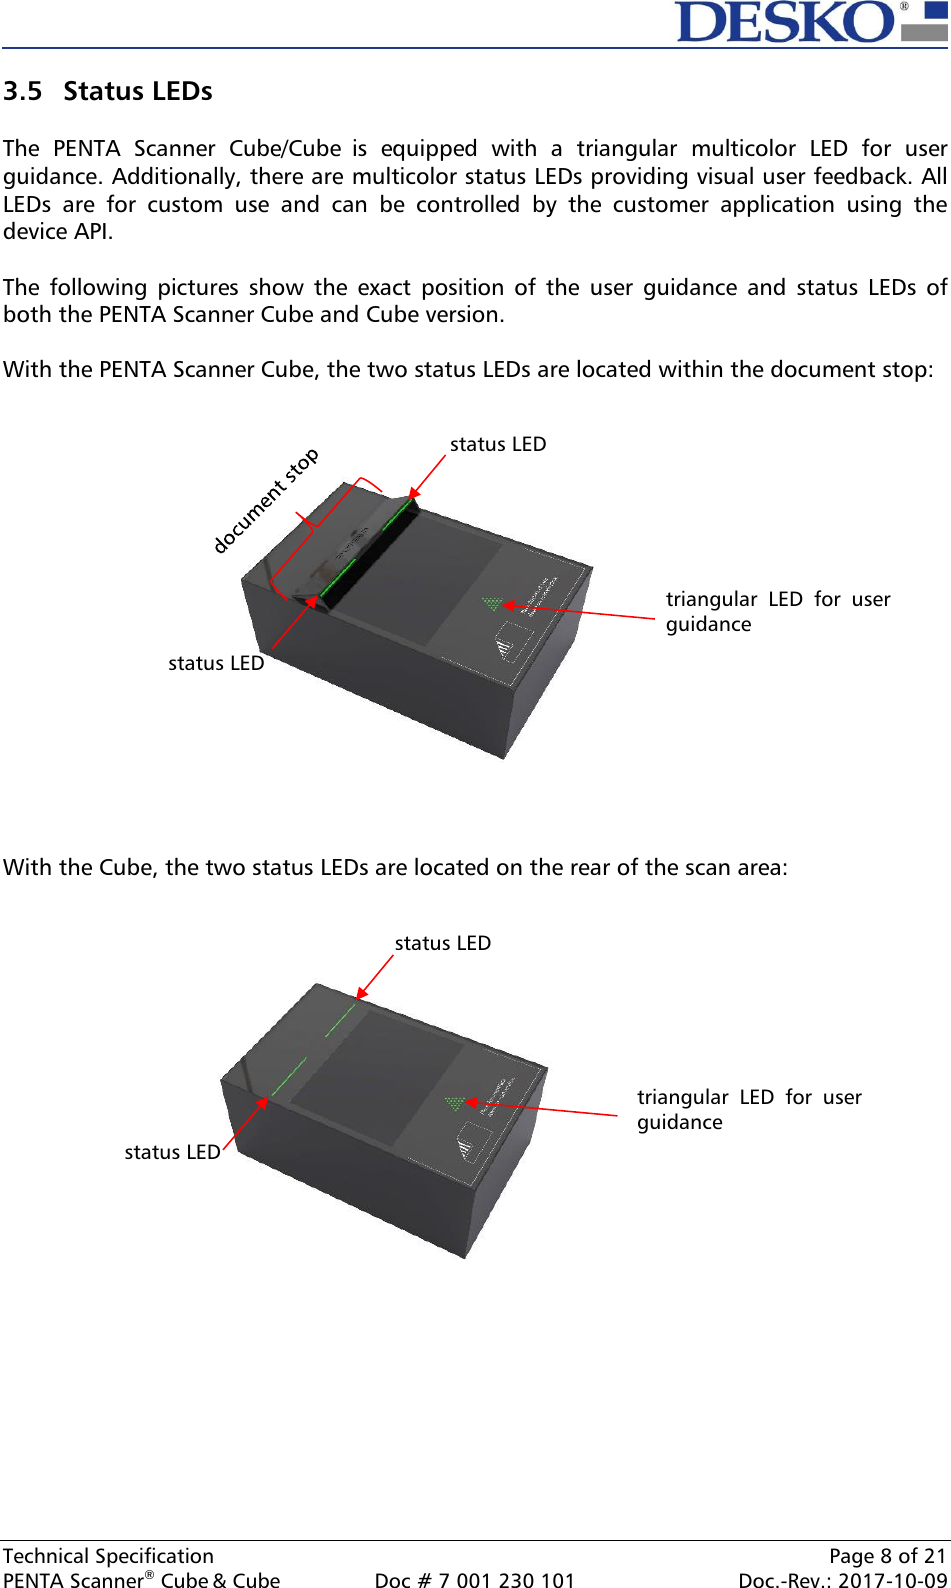  Technical Specification    Page 8 of 21 PENTA Scanner® Cube &amp; Cube  Doc # 7 001 230 101  Doc.-Rev.: 2017-10-09    3.5 Status LEDs  The  PENTA  Scanner  Cube/Cube is  equipped  with  a  triangular  multicolor  LED  for  user guidance. Additionally, there are multicolor status LEDs providing visual user feedback. All LEDs  are  for  custom  use  and  can  be  controlled  by  the  customer  application  using  the device API.  The  following  pictures  show  the  exact  position  of  the  user  guidance  and  status  LEDs  of both the PENTA Scanner Cube and Cube version.  With the PENTA Scanner Cube, the two status LEDs are located within the document stop:                   With the Cube, the two status LEDs are located on the rear of the scan area:                    triangular  LED  for  user guidance triangular  LED  for  user guidance status LED status LED status LED status LED 